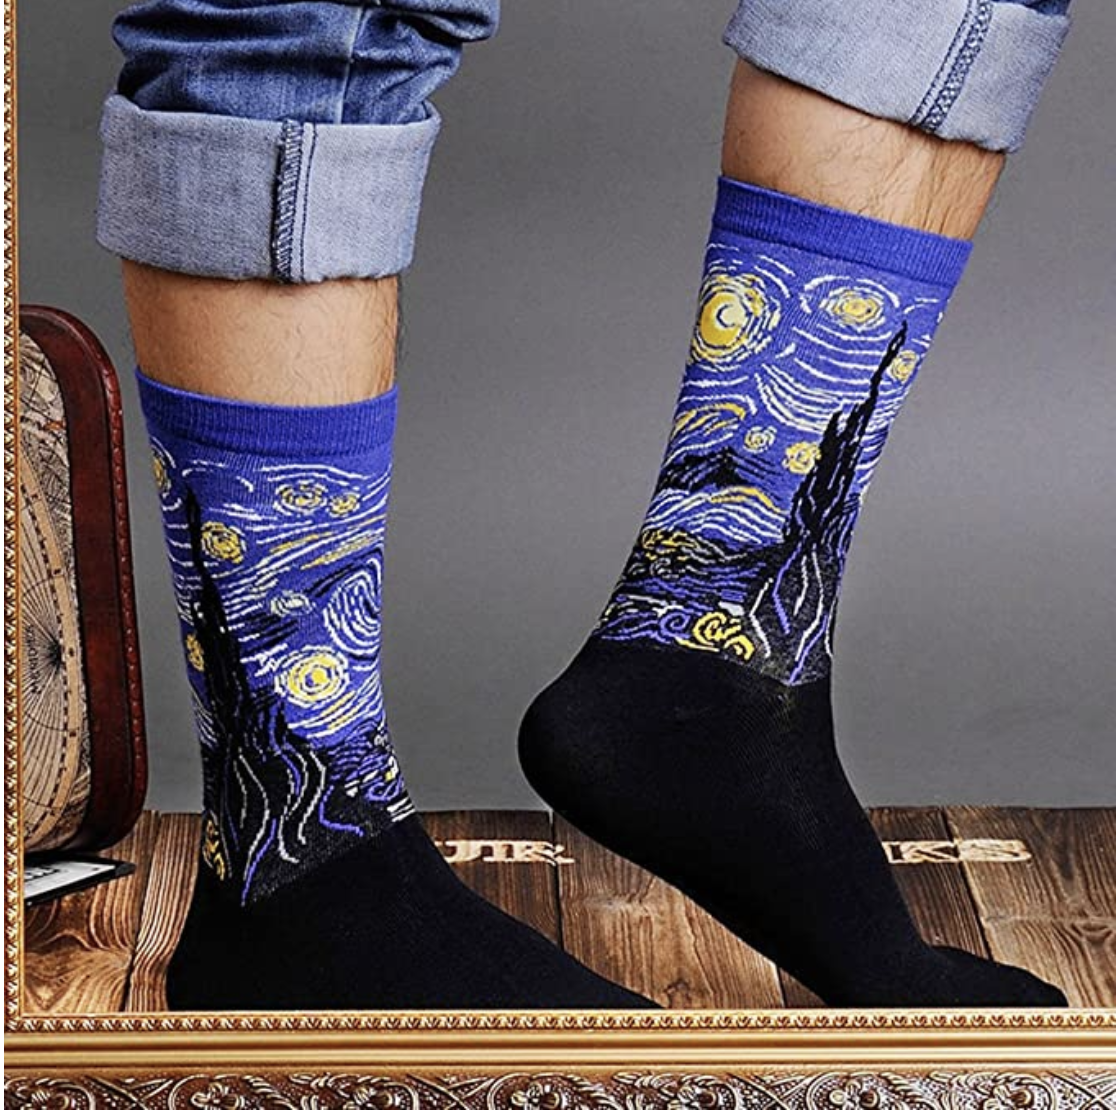 person with the starry night socks on